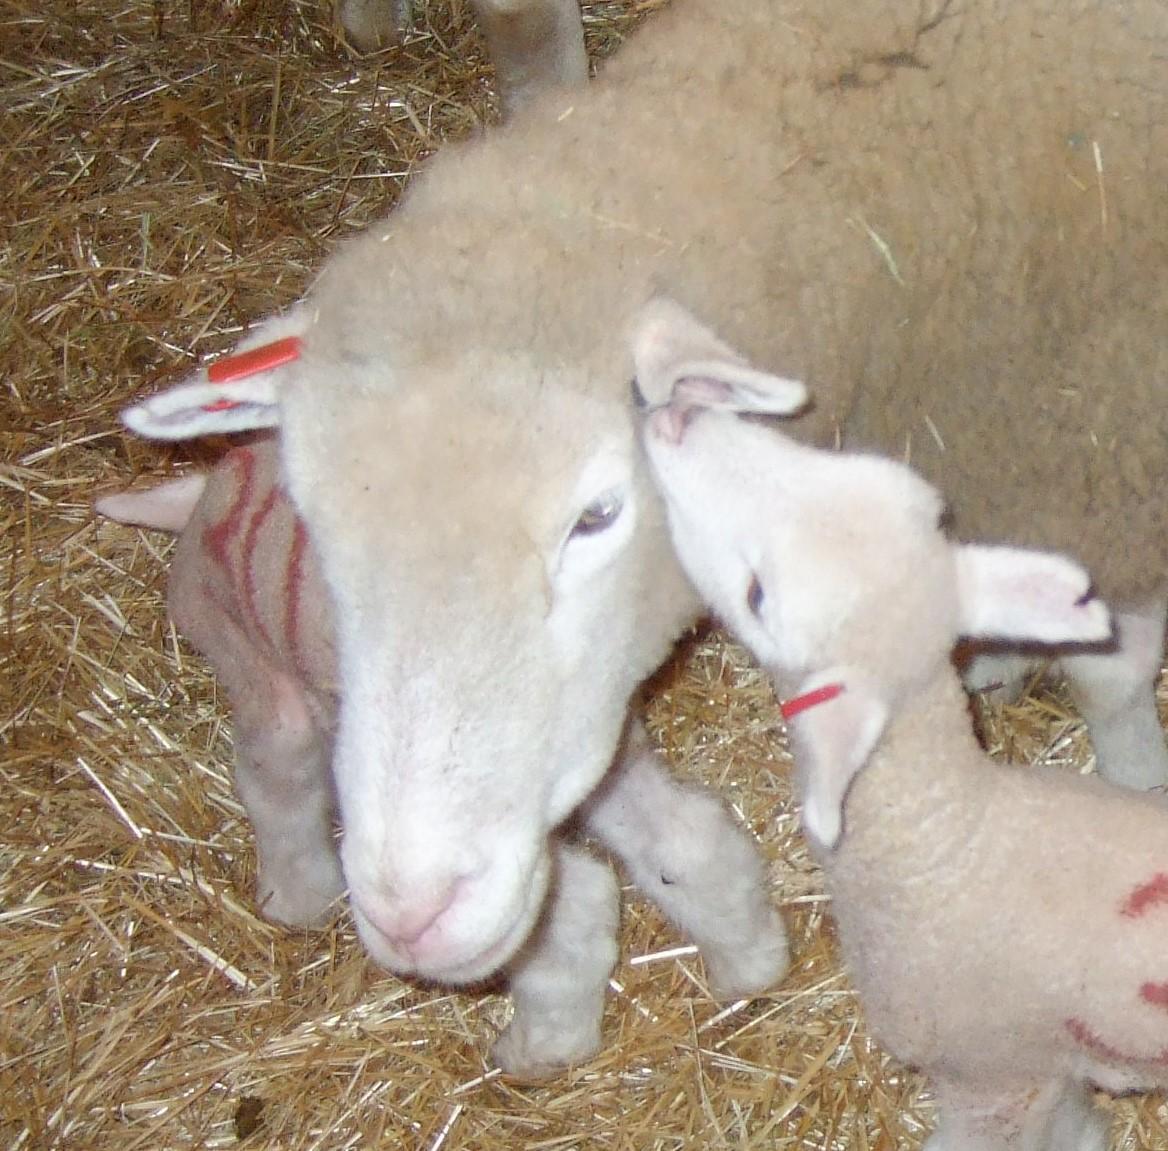 New lamb protection during wintertime explained